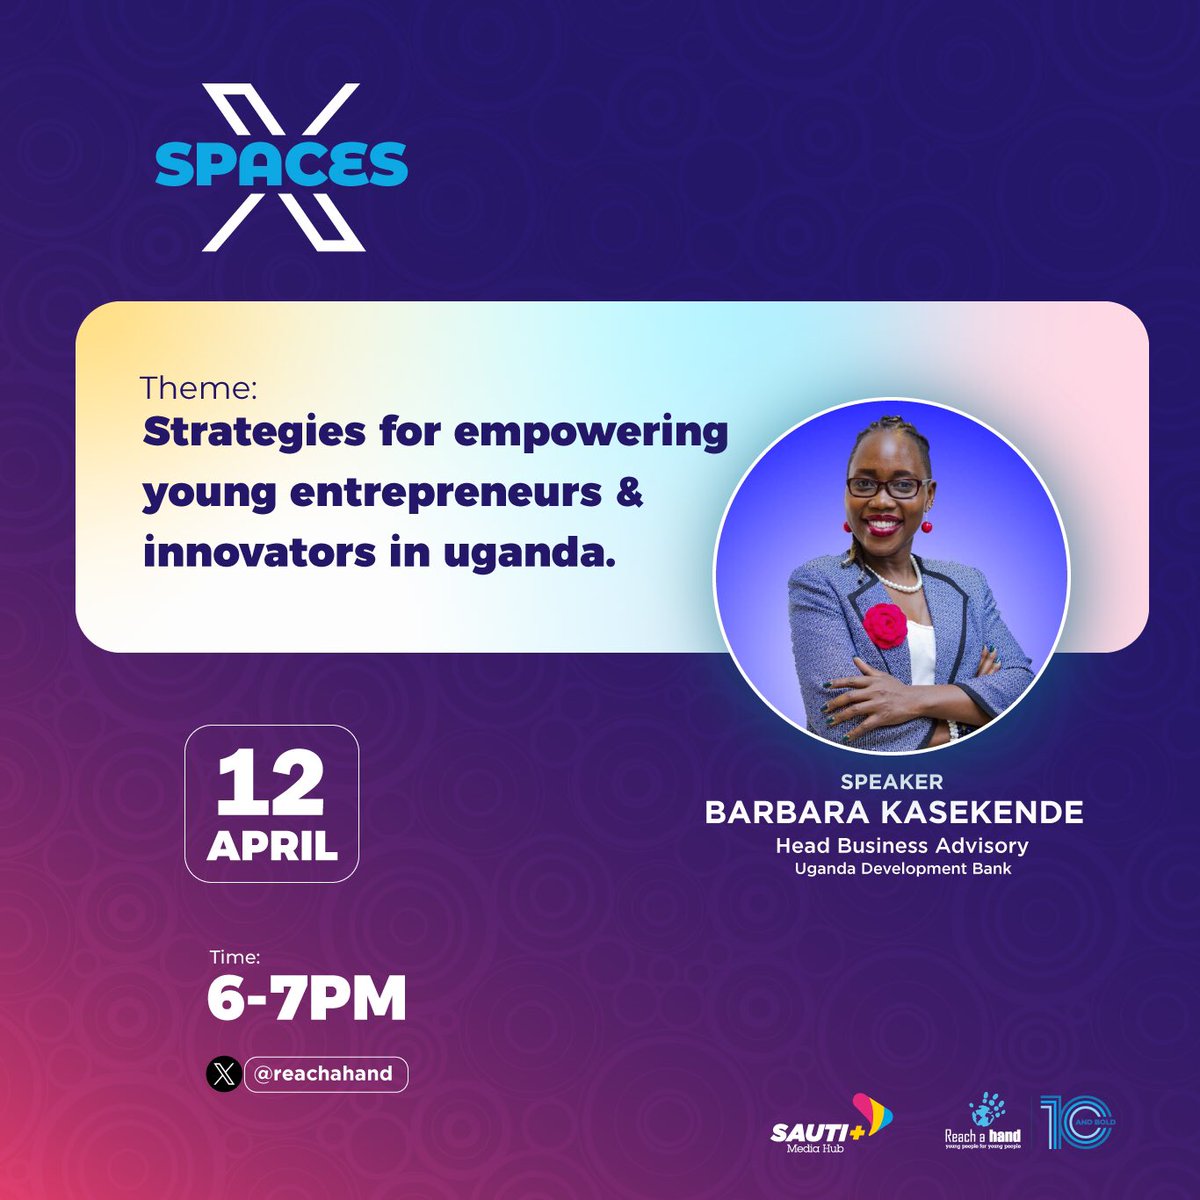 Excited to host @bknanzi, a passionate advocate for youth empowerment and women's voices, from Uganda Development Bank on today's X Space. Join us as she shares insights on planning for a brighter future amidst the high tax rates. rb.gy/vl4att #YouthEmpowerment